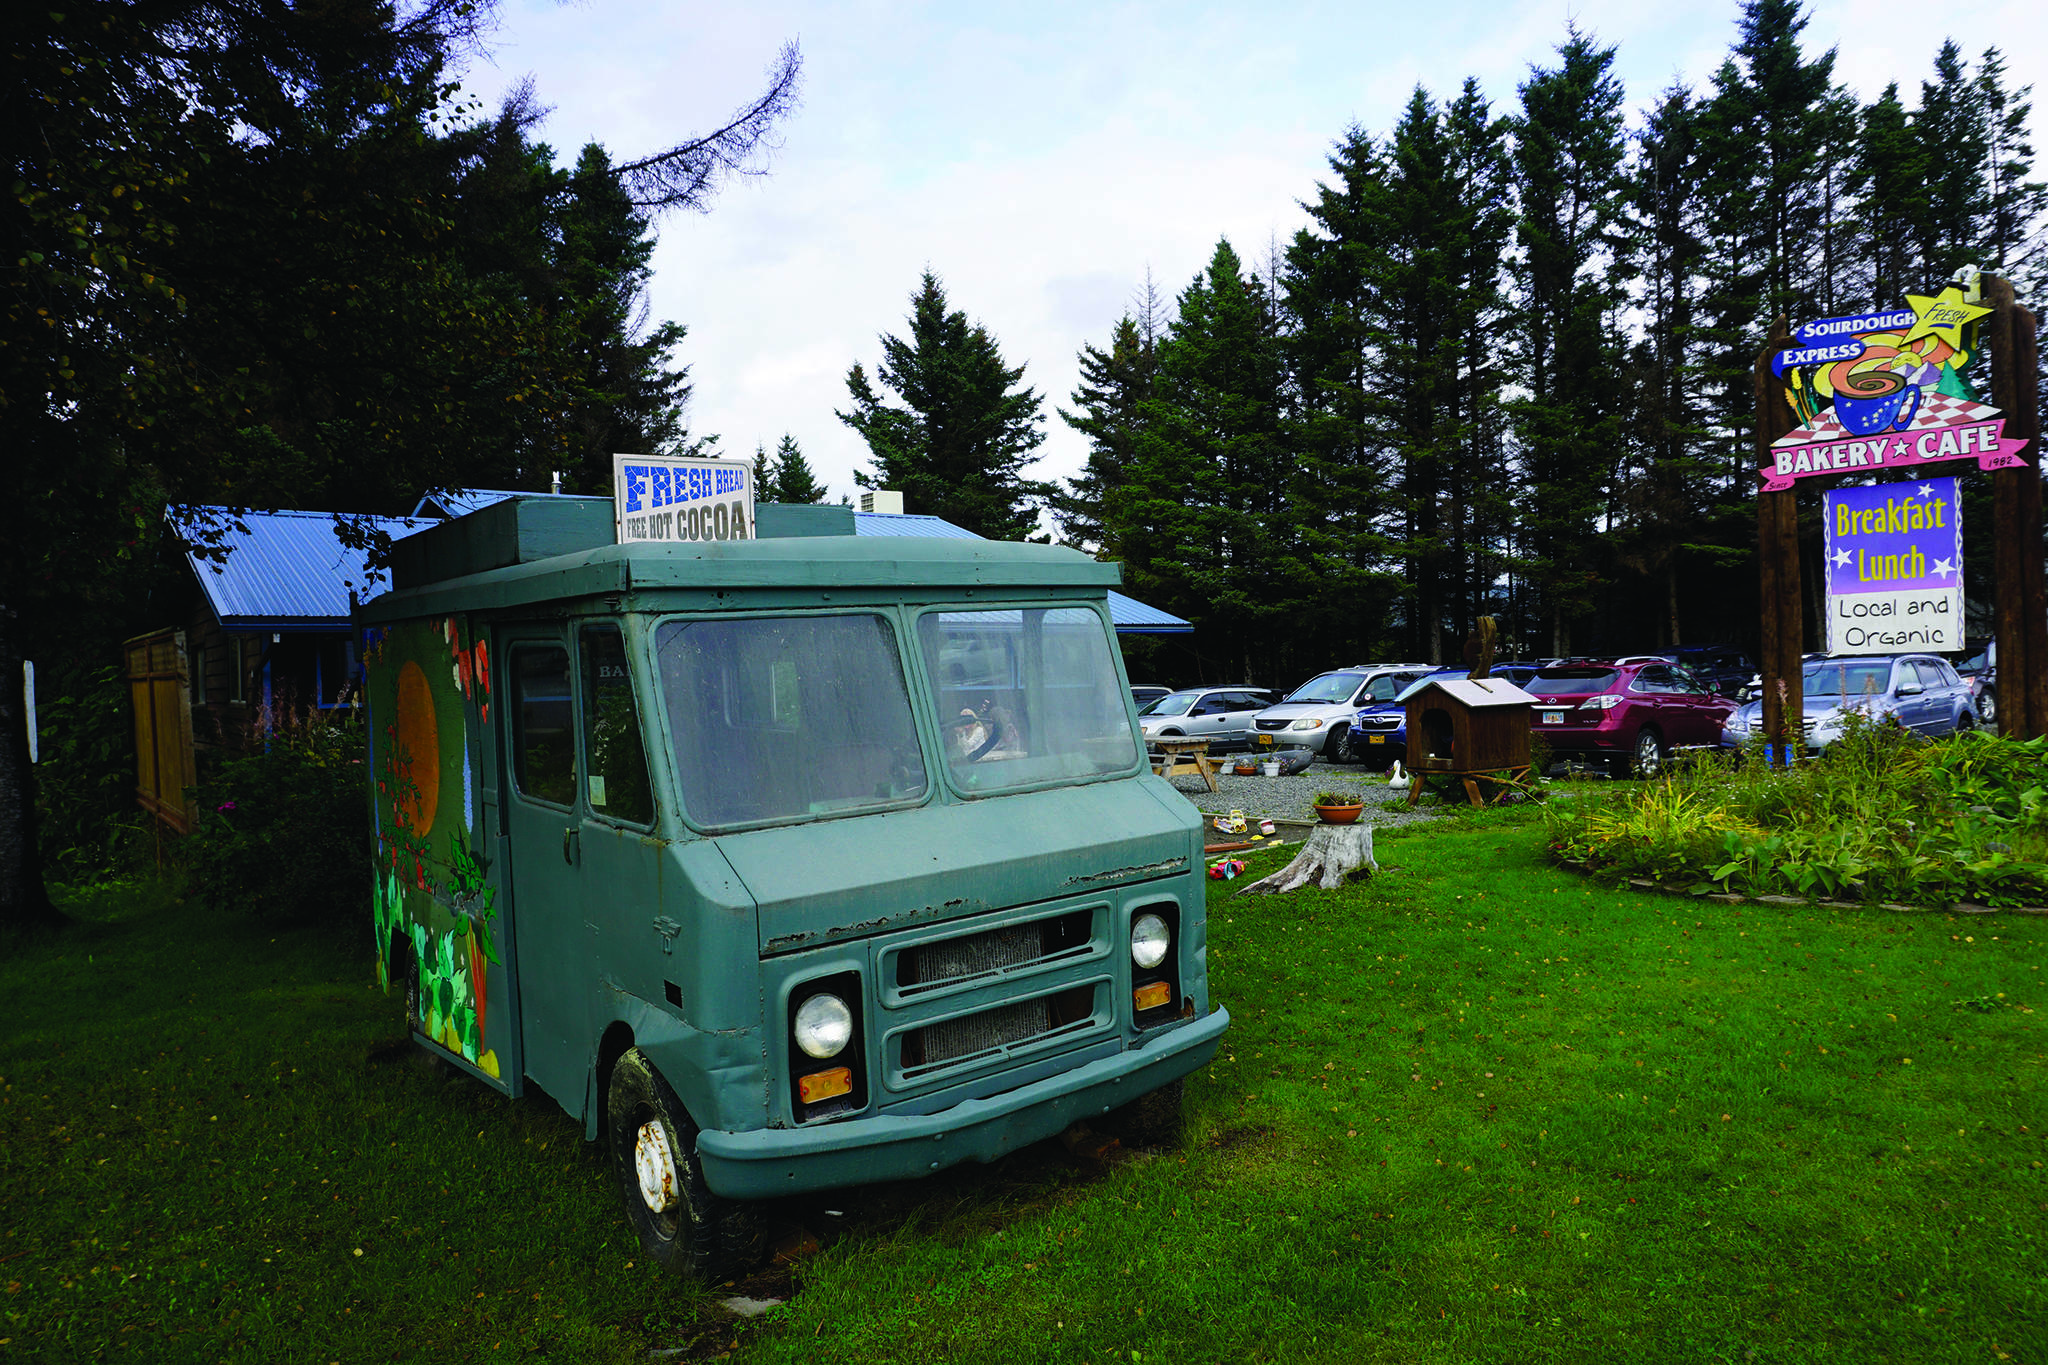 The original van of the Fresh Sourdough Express Bakery and Cafe marks the business’ origins. The landmark business closed last month in Homer, Alaska. (Photo by Michael Armstrong/Homer News)